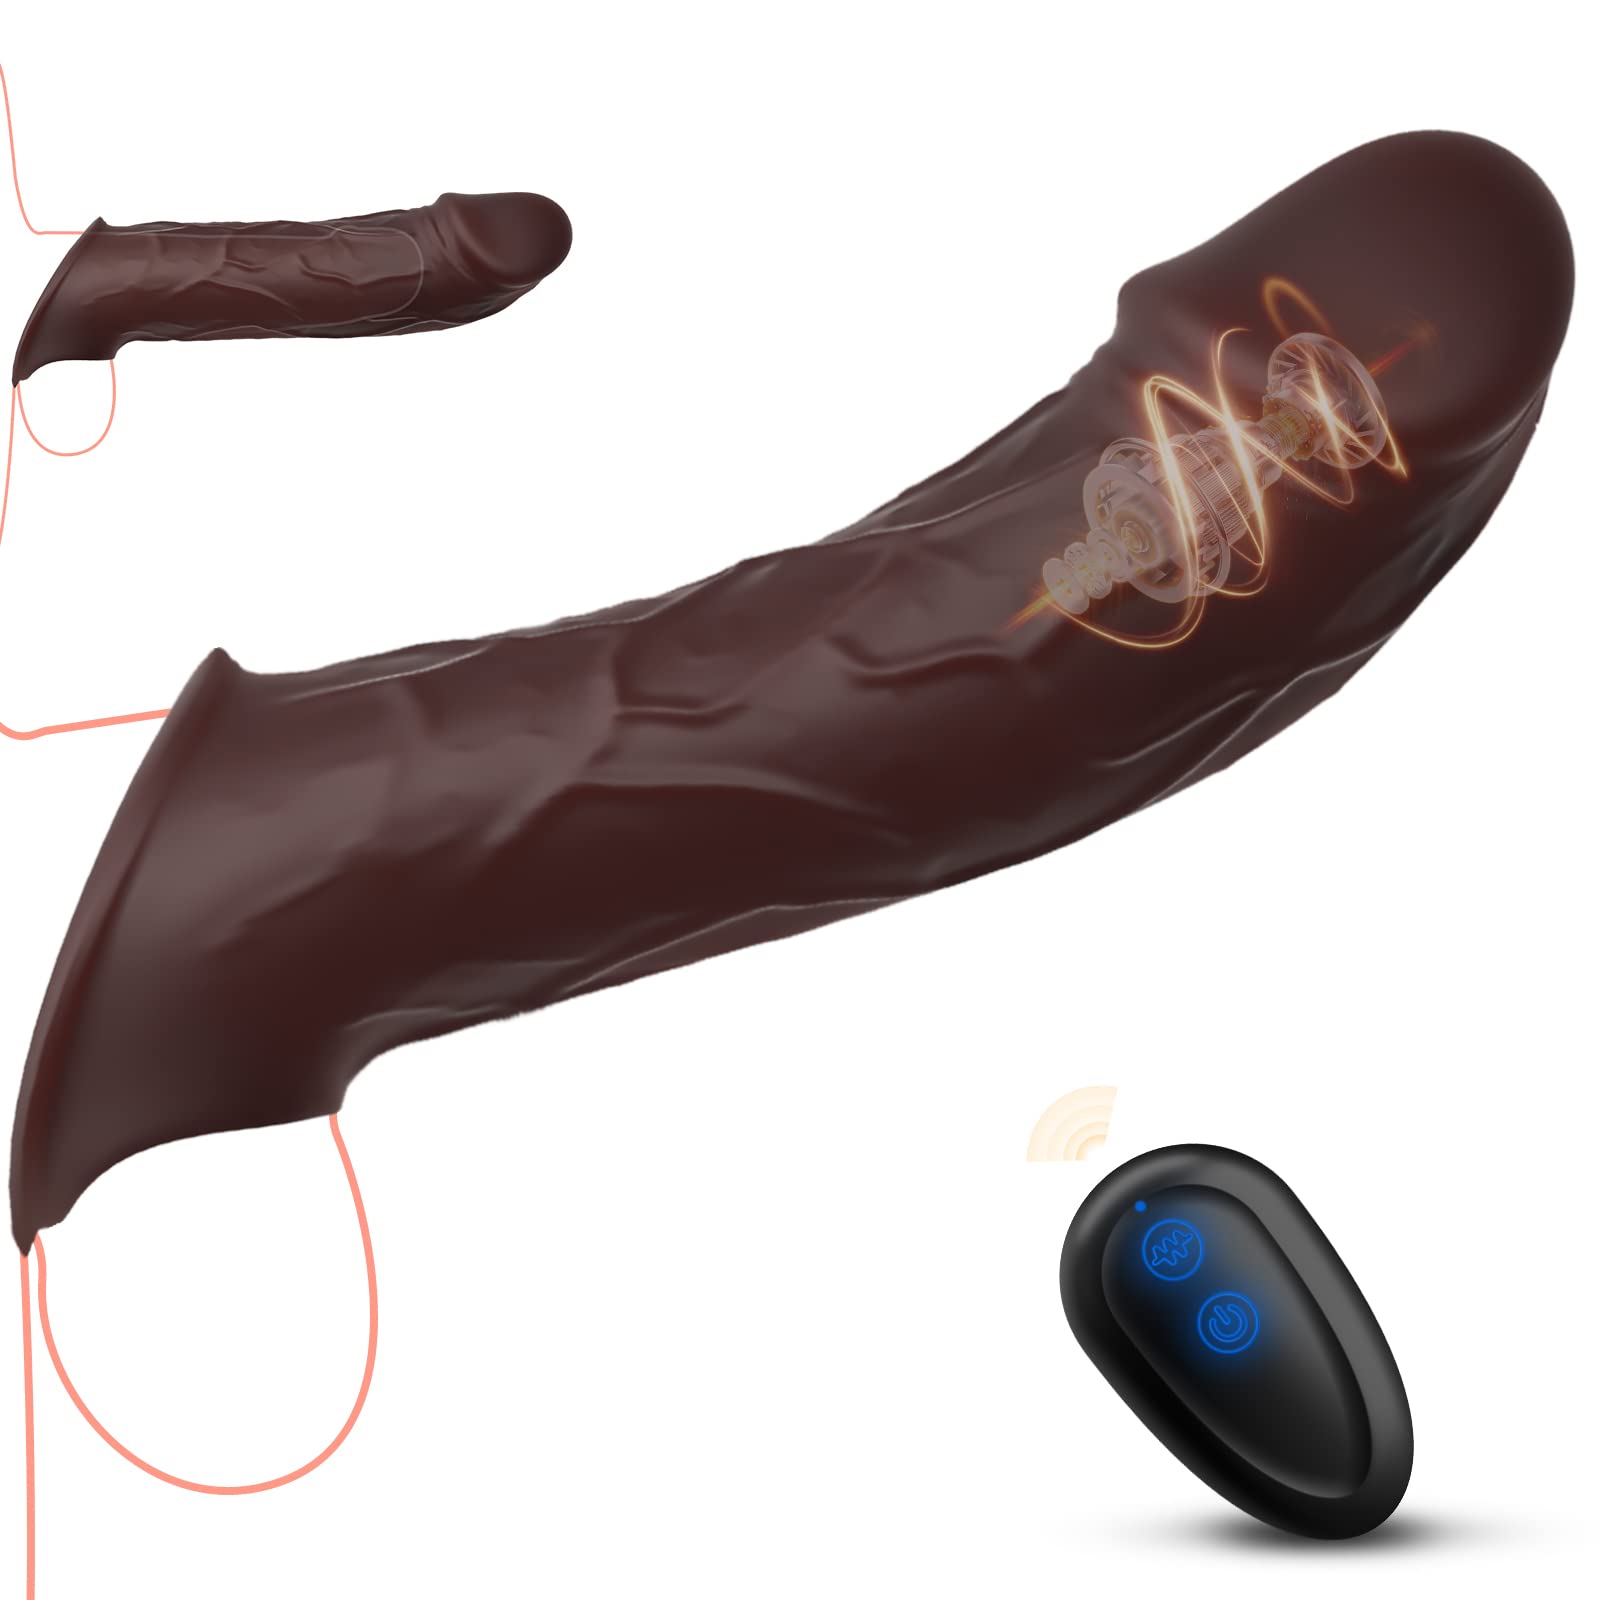 ROSYROSY 2.4 Inch Extension 10 Vibrating Remote Controlled Penis Sleeve with Ball Strap